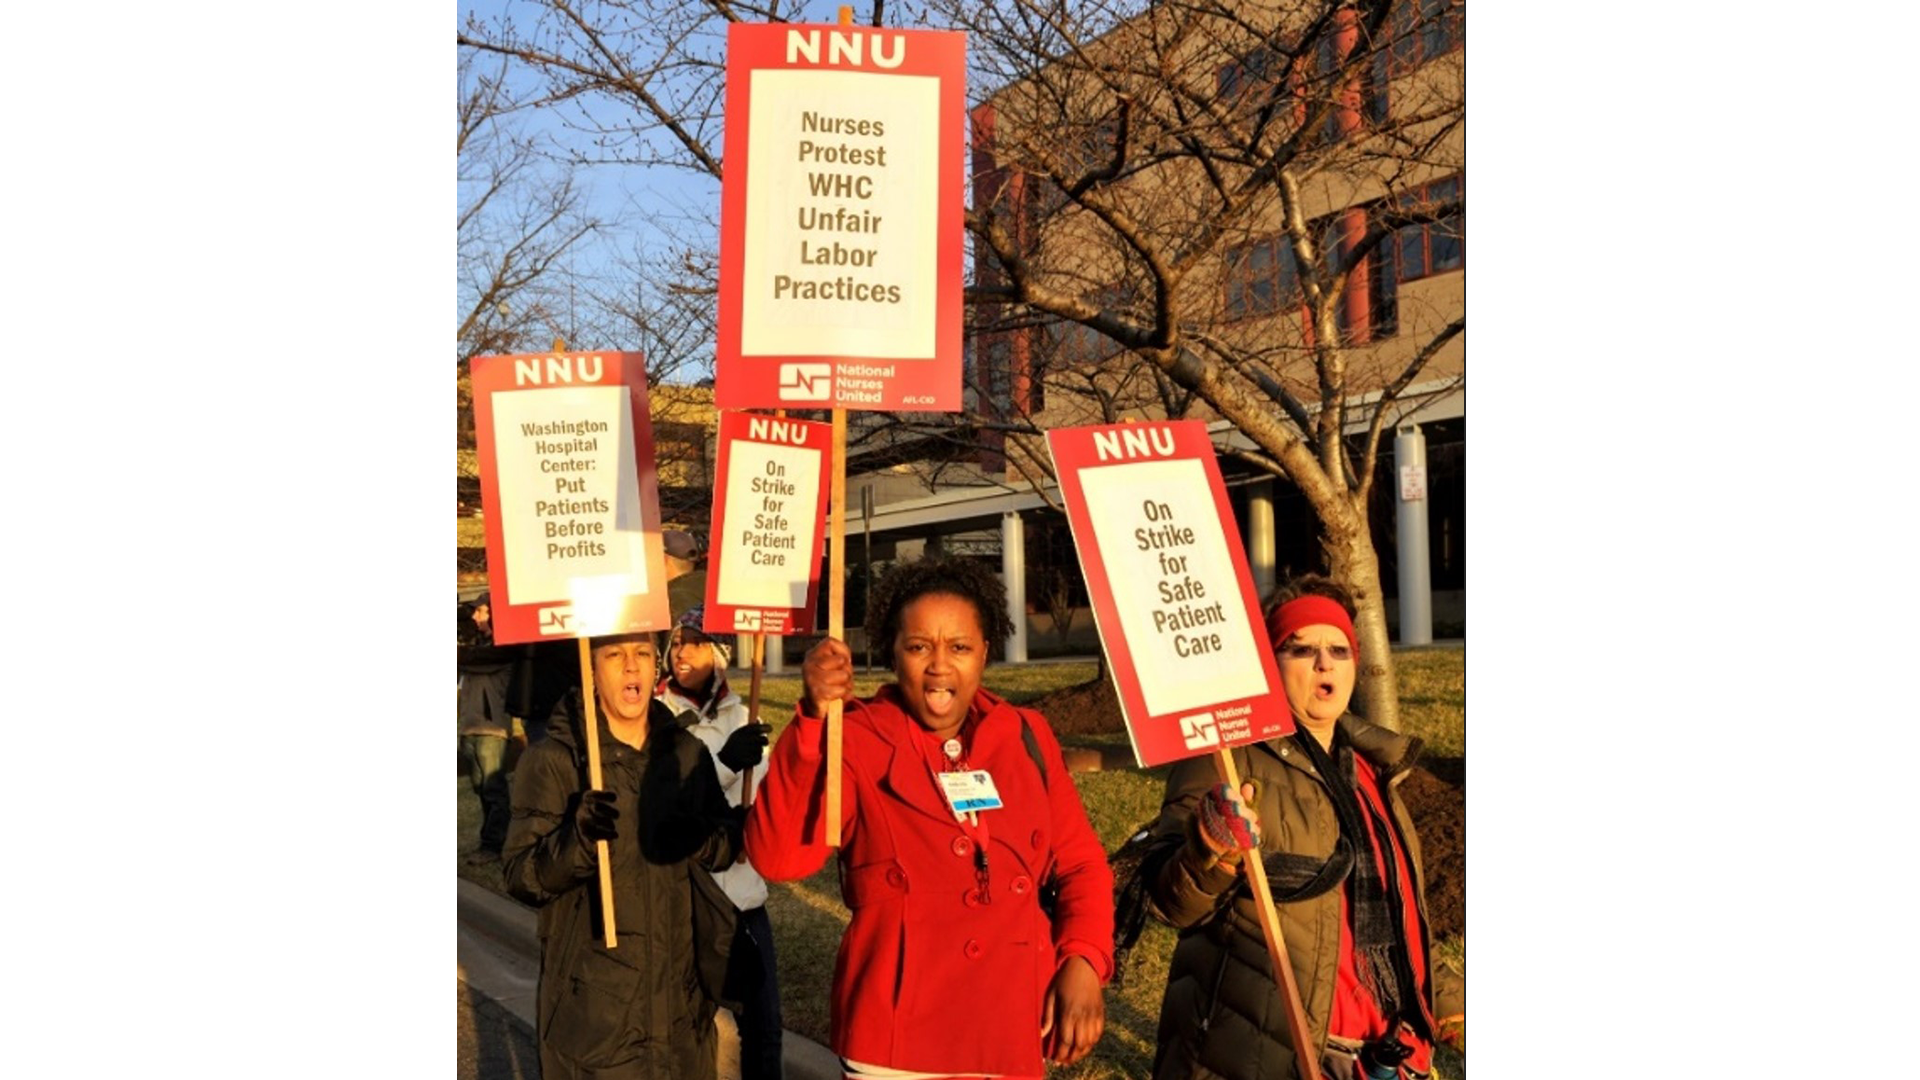 A group of nurses hold picket signs